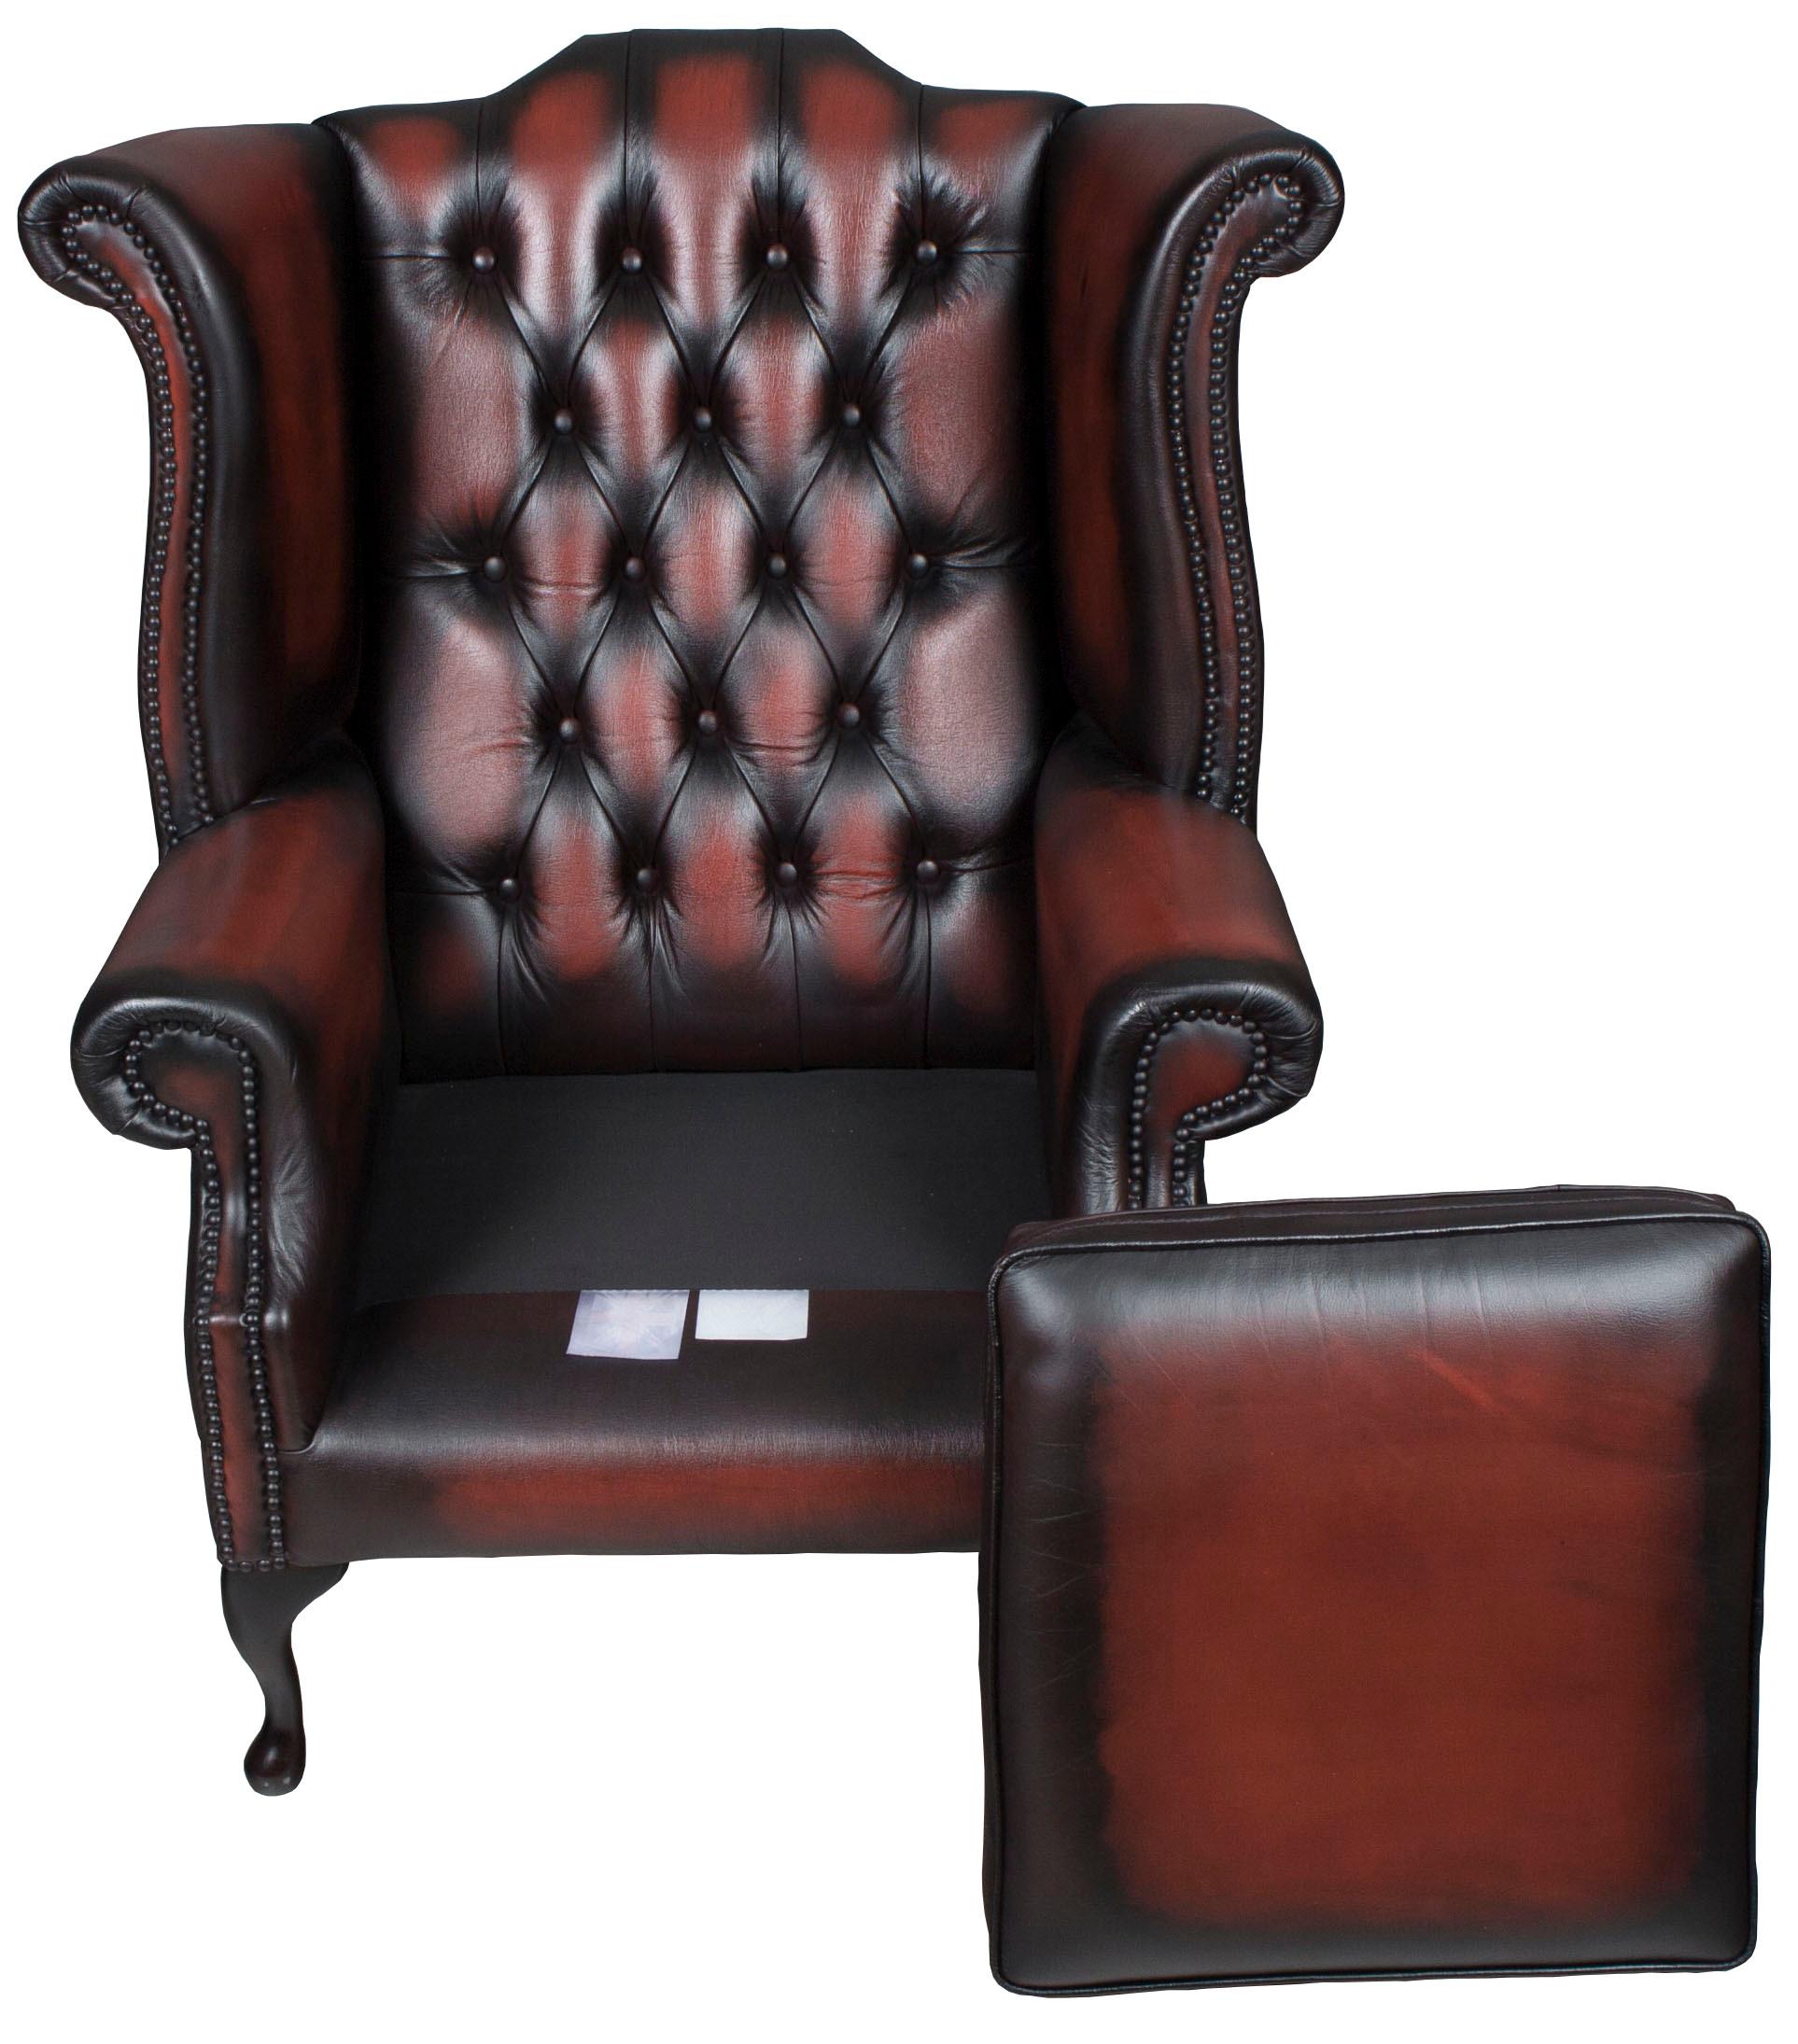 This exquisite red leather wing back armchair was crafted in England around 1980. Designed in a traditional Queen Anne style, this beautiful wing back chair features rich red leather, brass brads, and mahogany pad feet. The leather is quite stunning